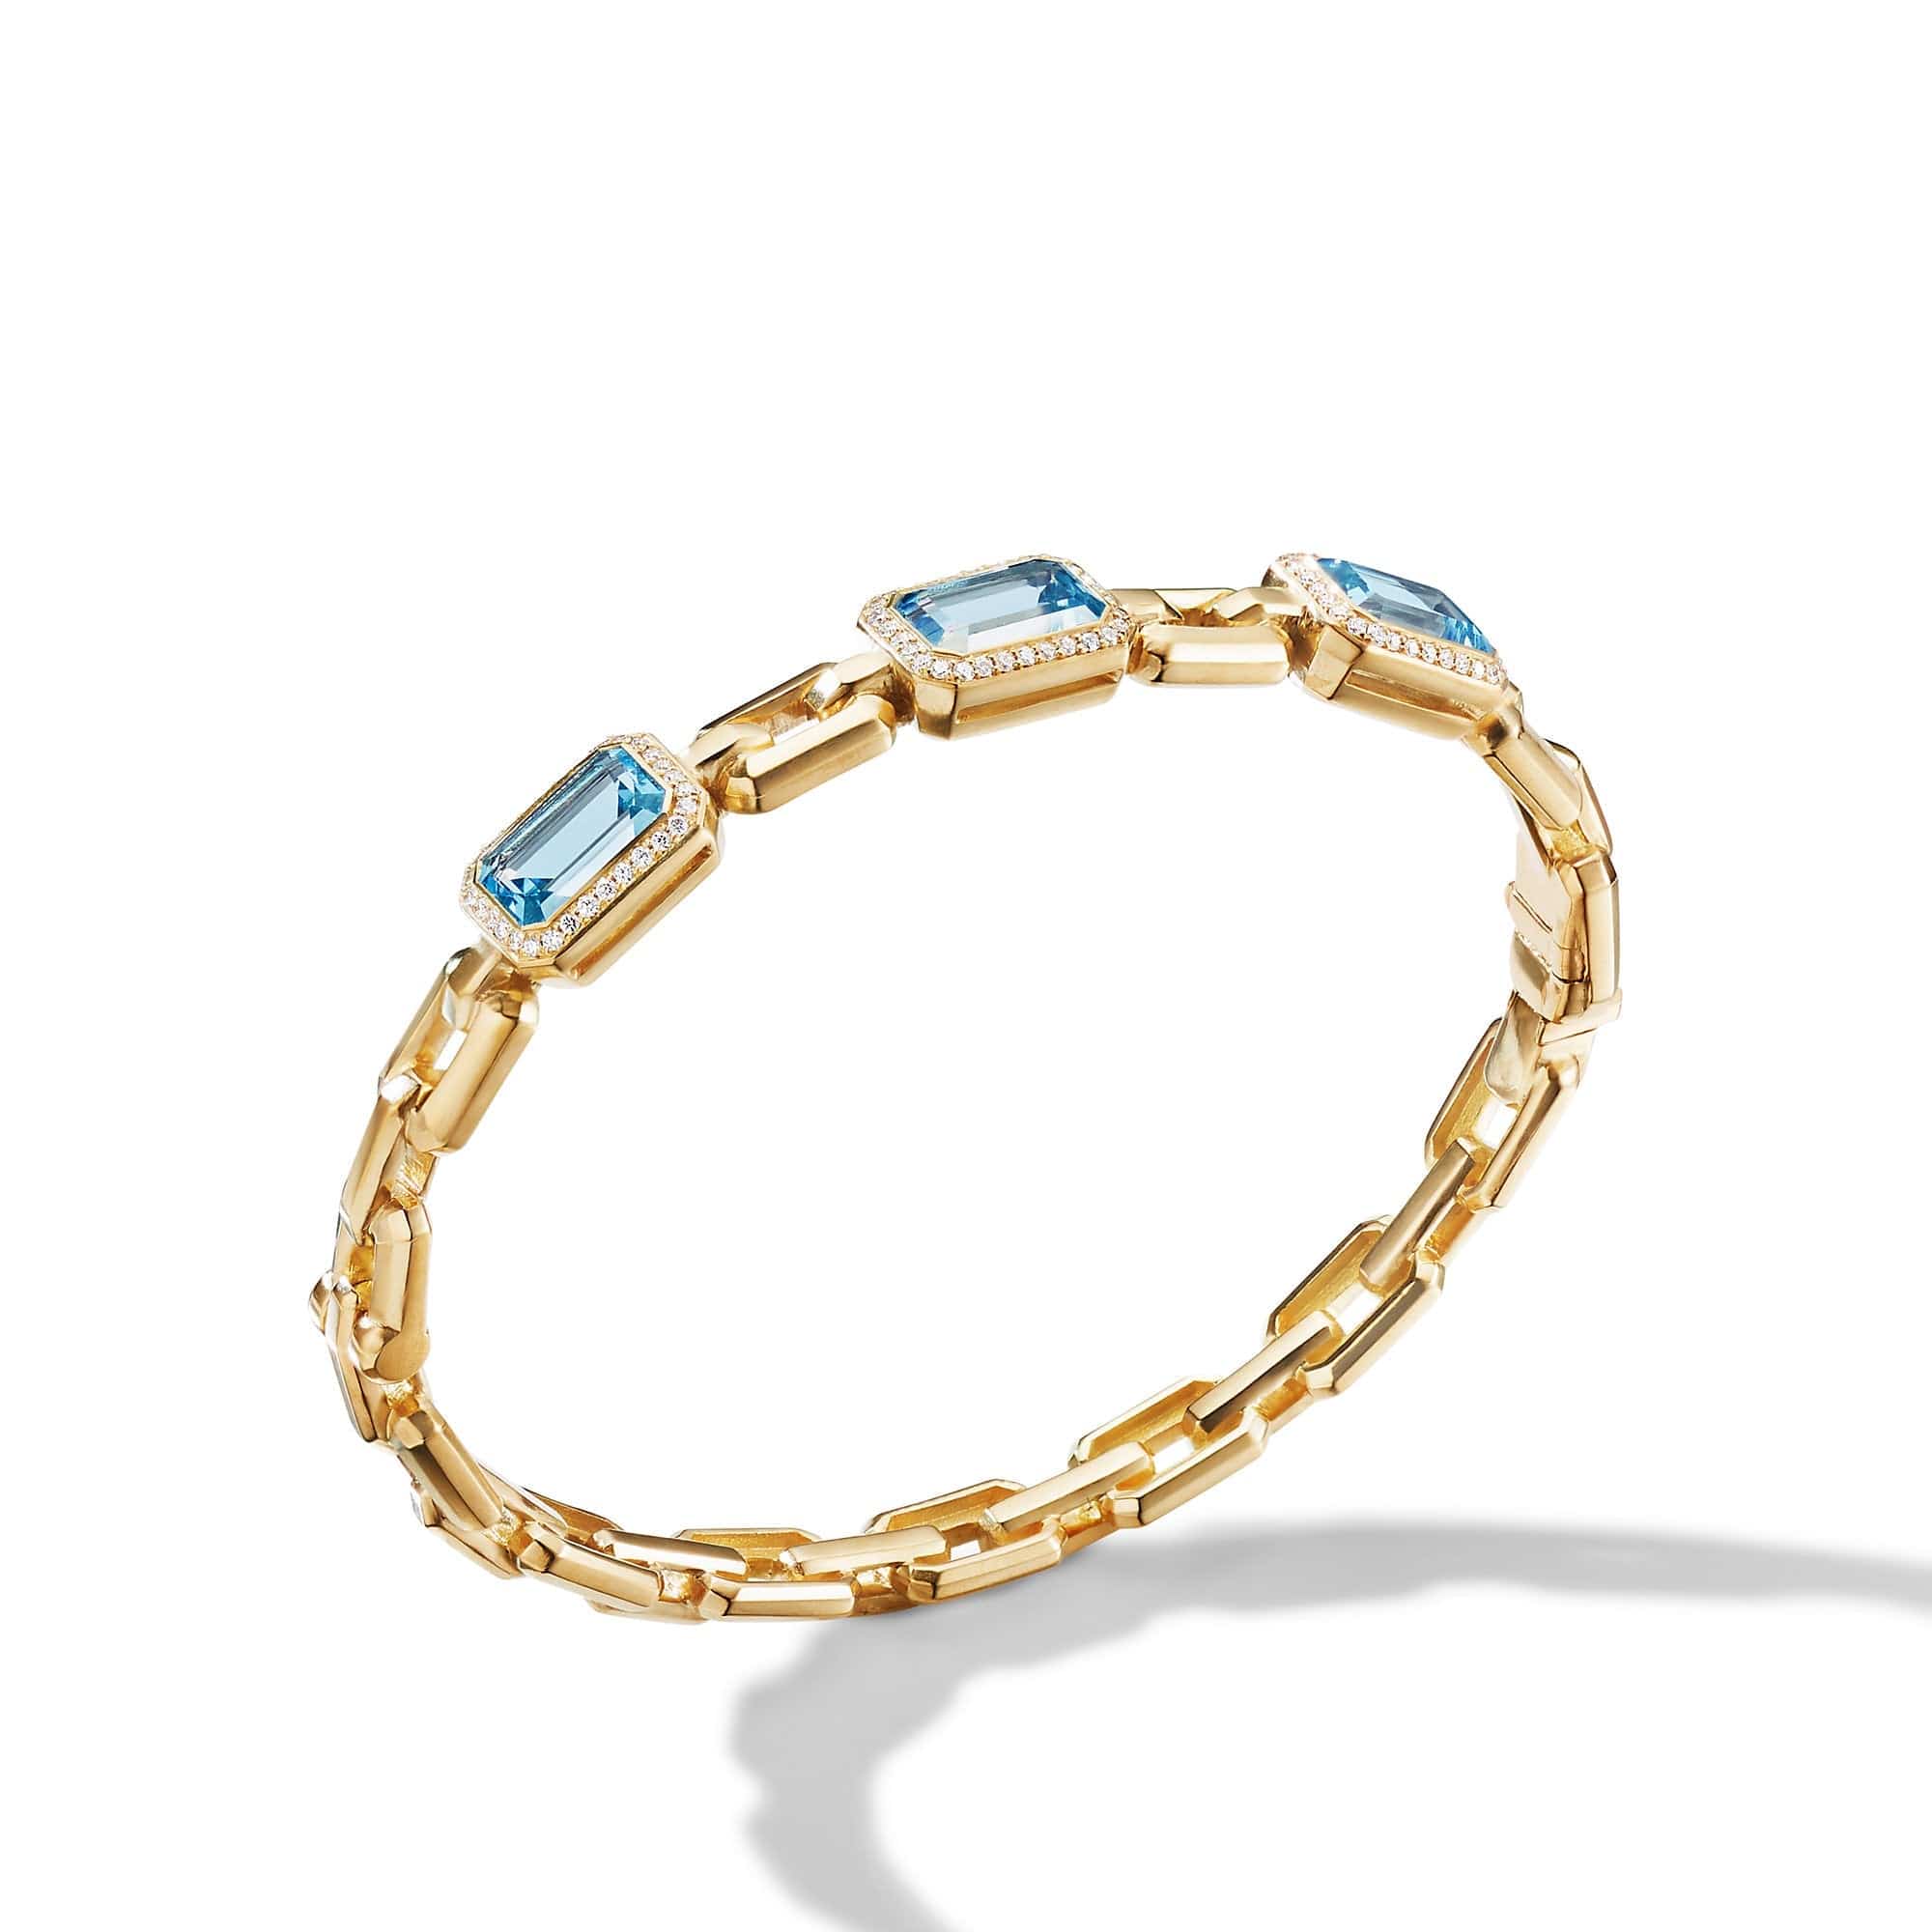 Novella Three Stone Bracelet in 18K Yellow Gold with Blue Topaz and Diamonds, Long's Jewelers